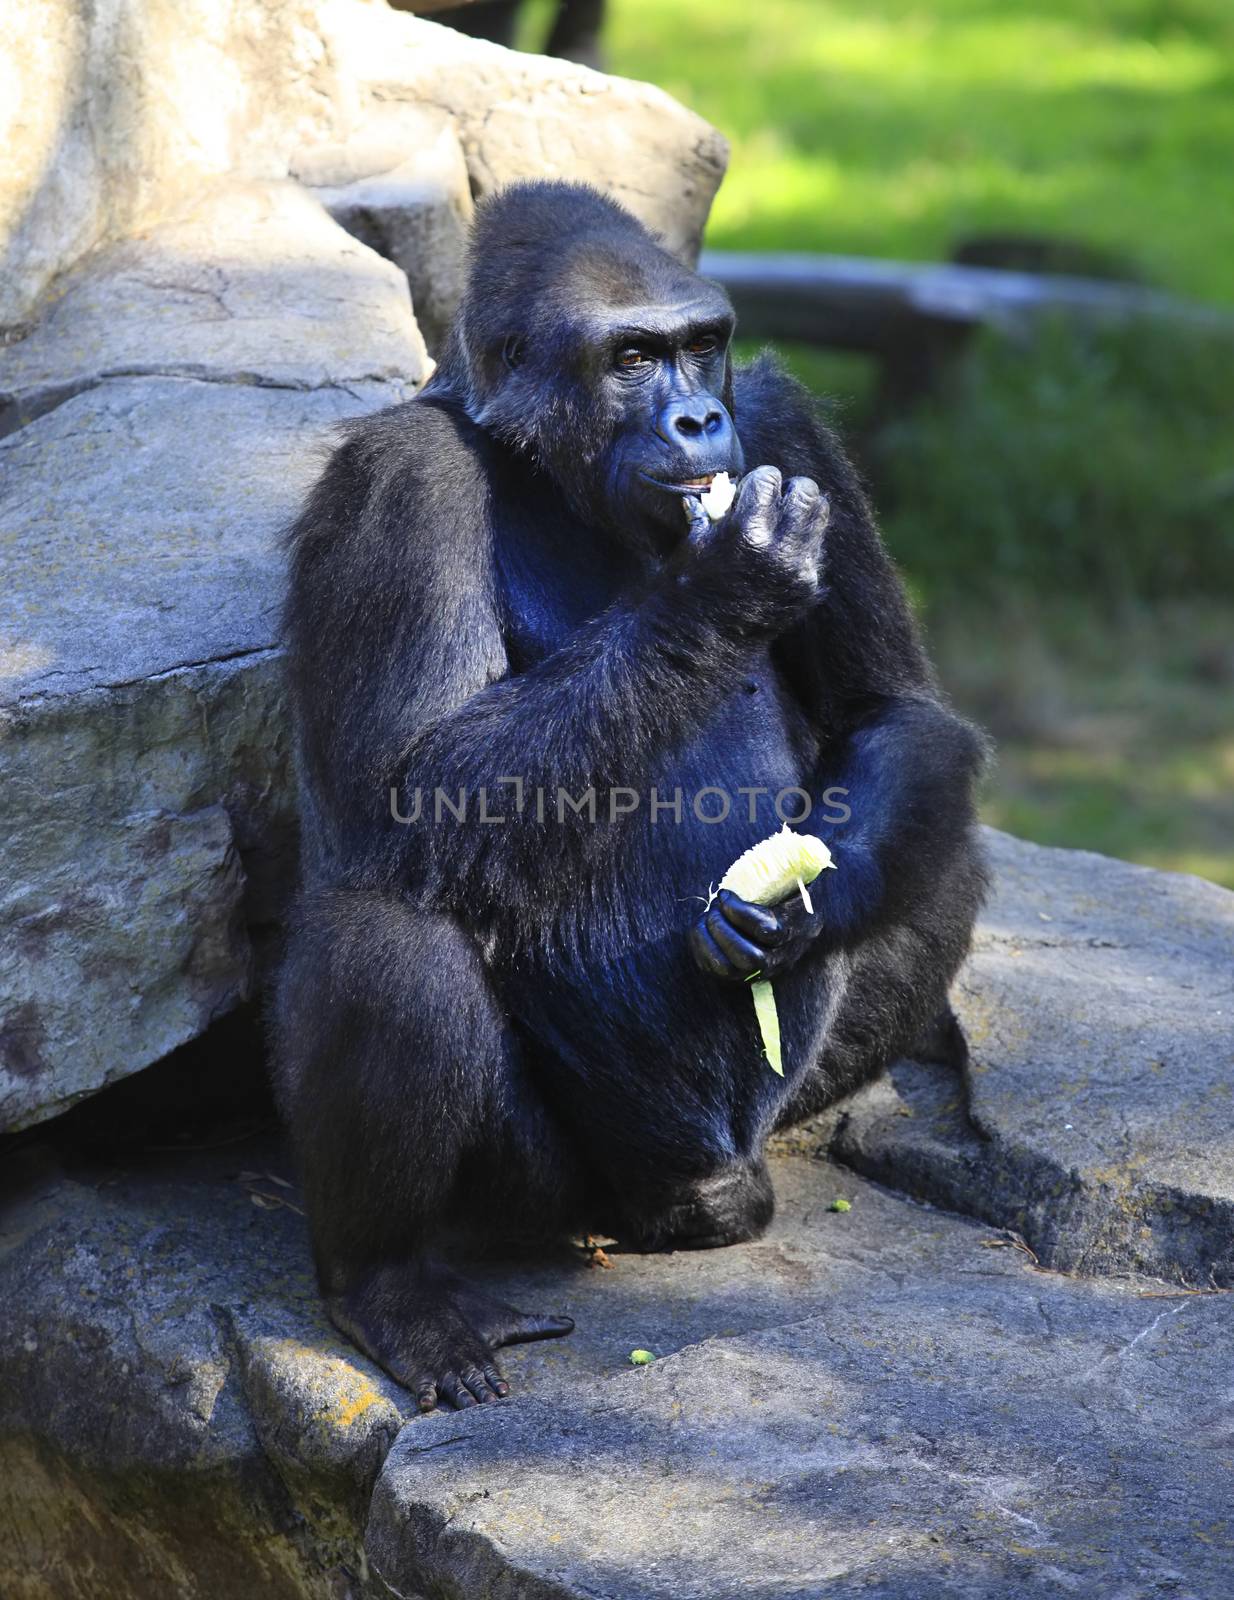 Gorilla eating cabbage in a zoo of San Francisco